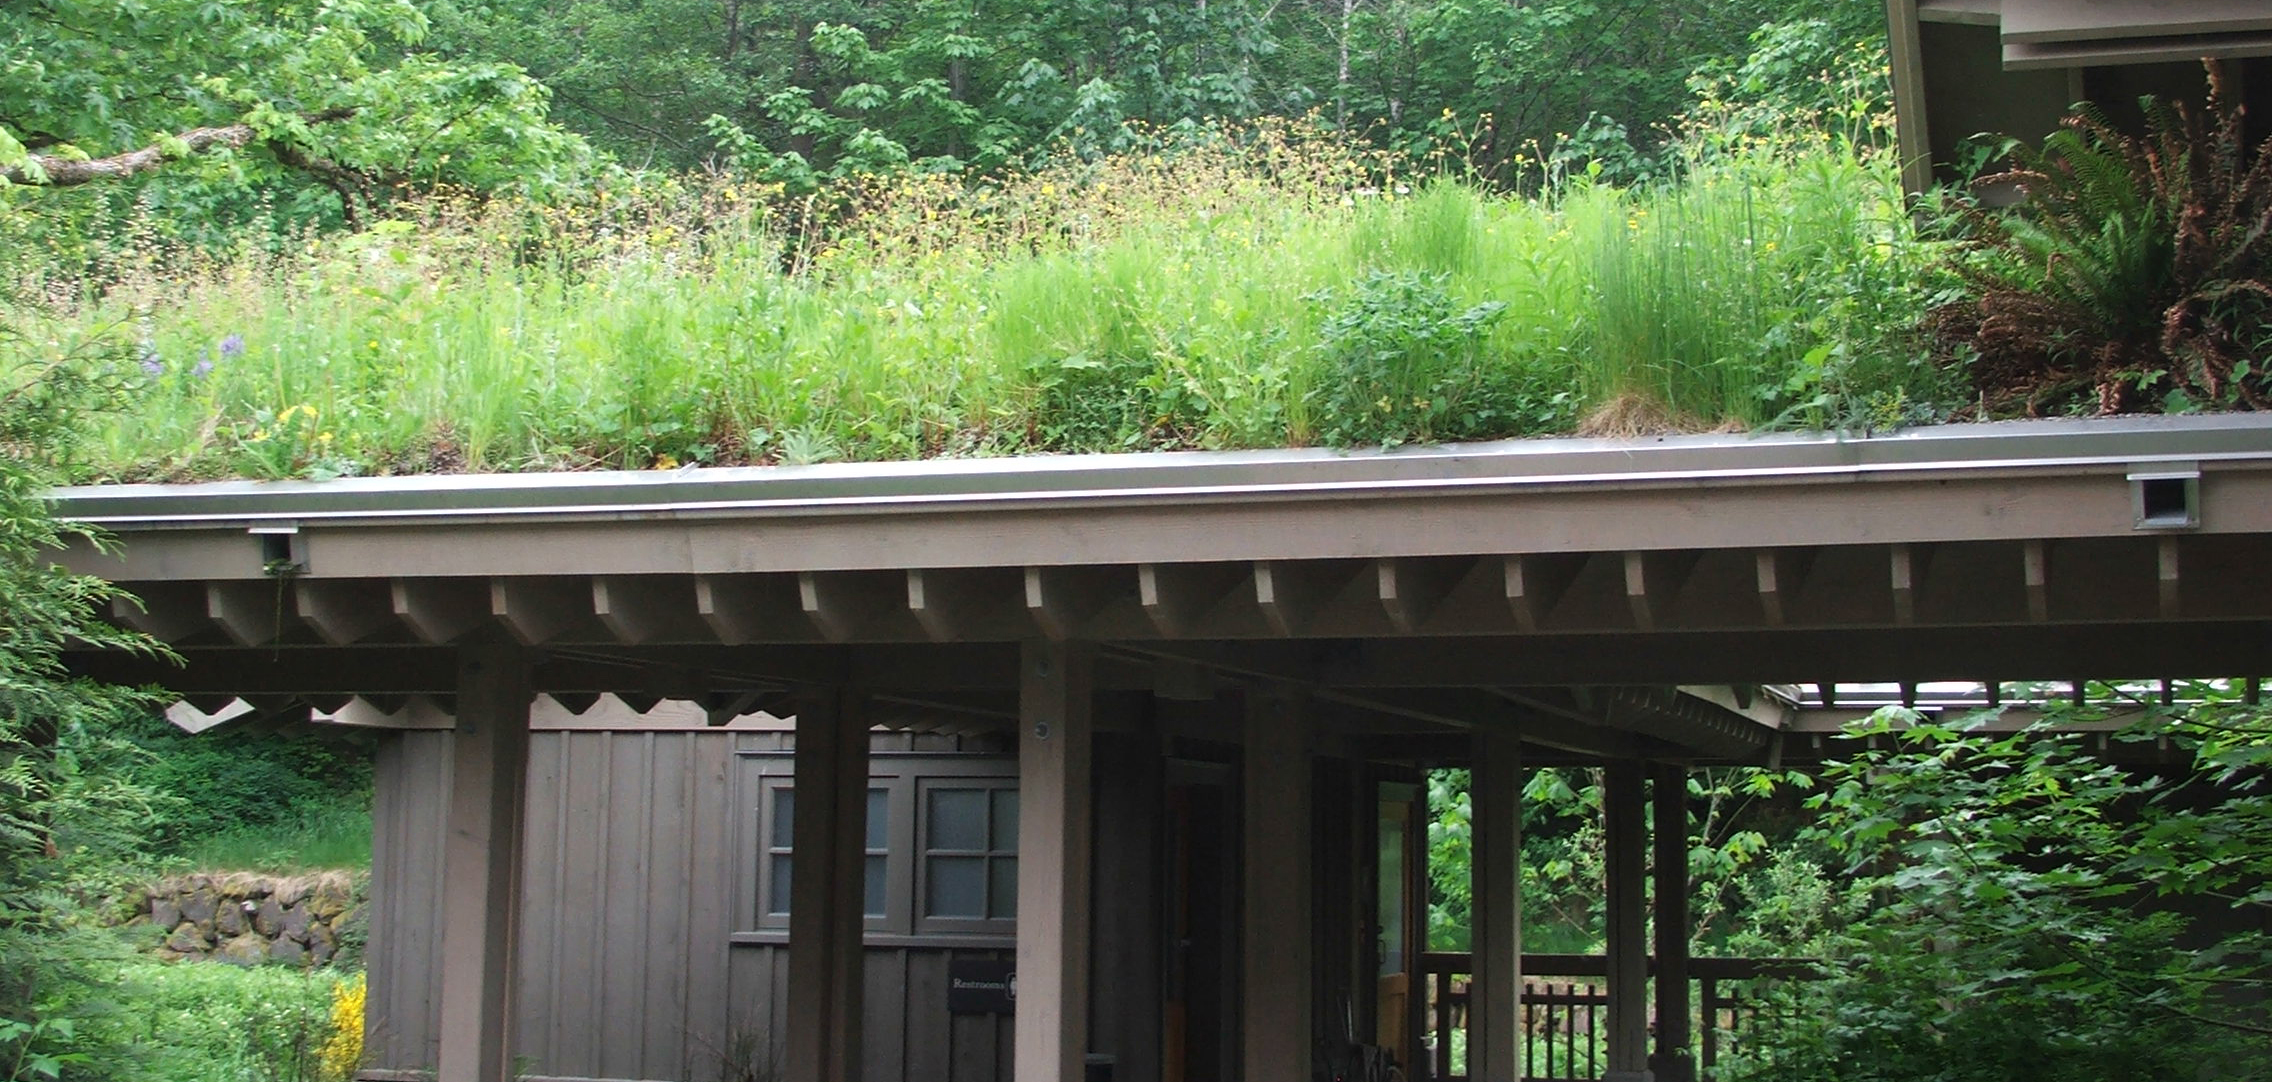 This is an image of a green roof.